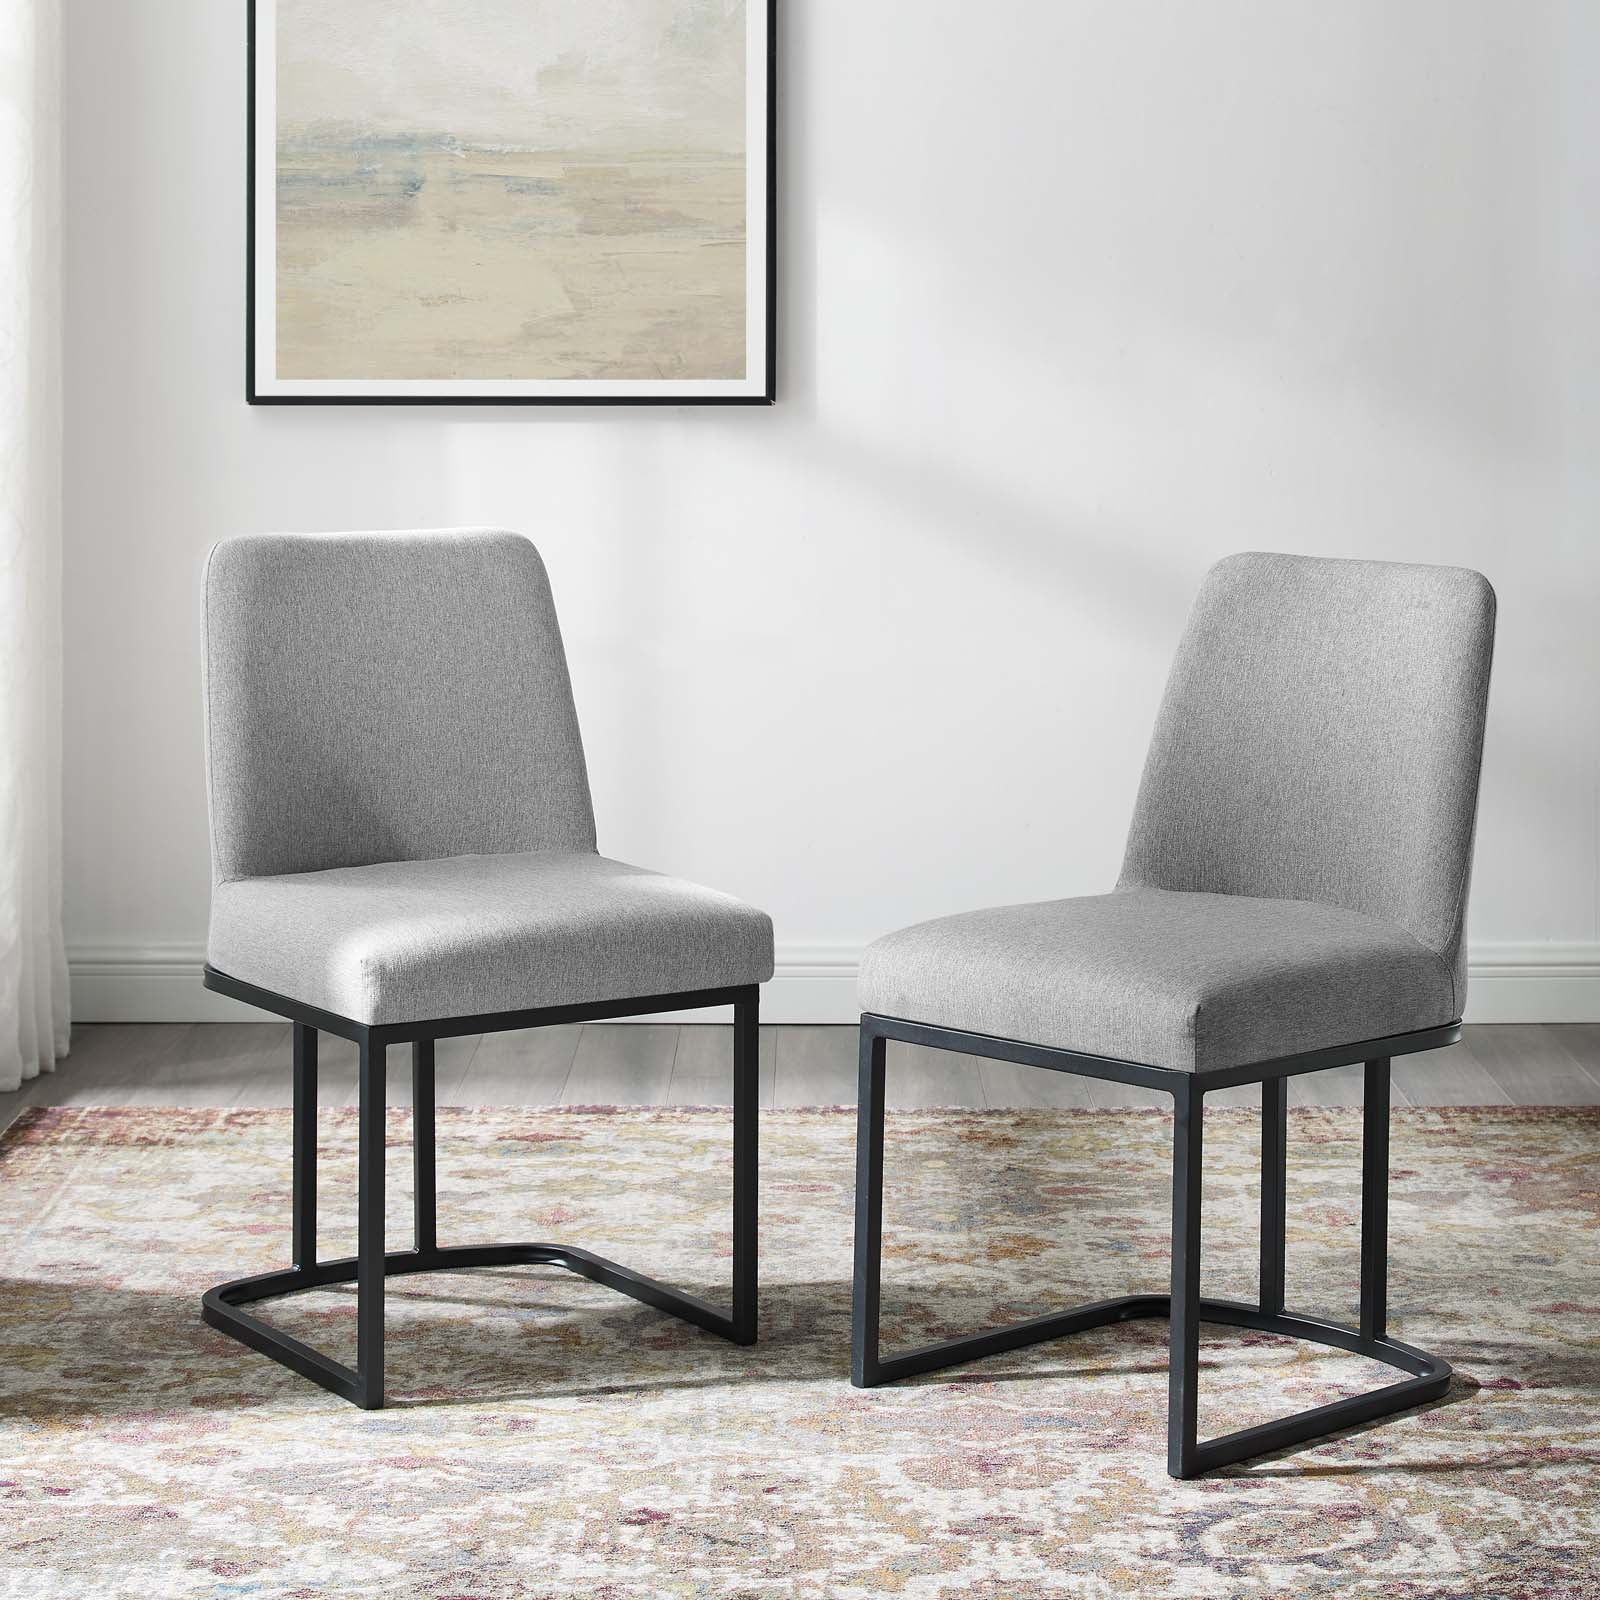 Modway Dining Chairs - Amplify Sled Base Upholstered Fabric Dining Chairs - ( Set of 2 ) Black Light Gray